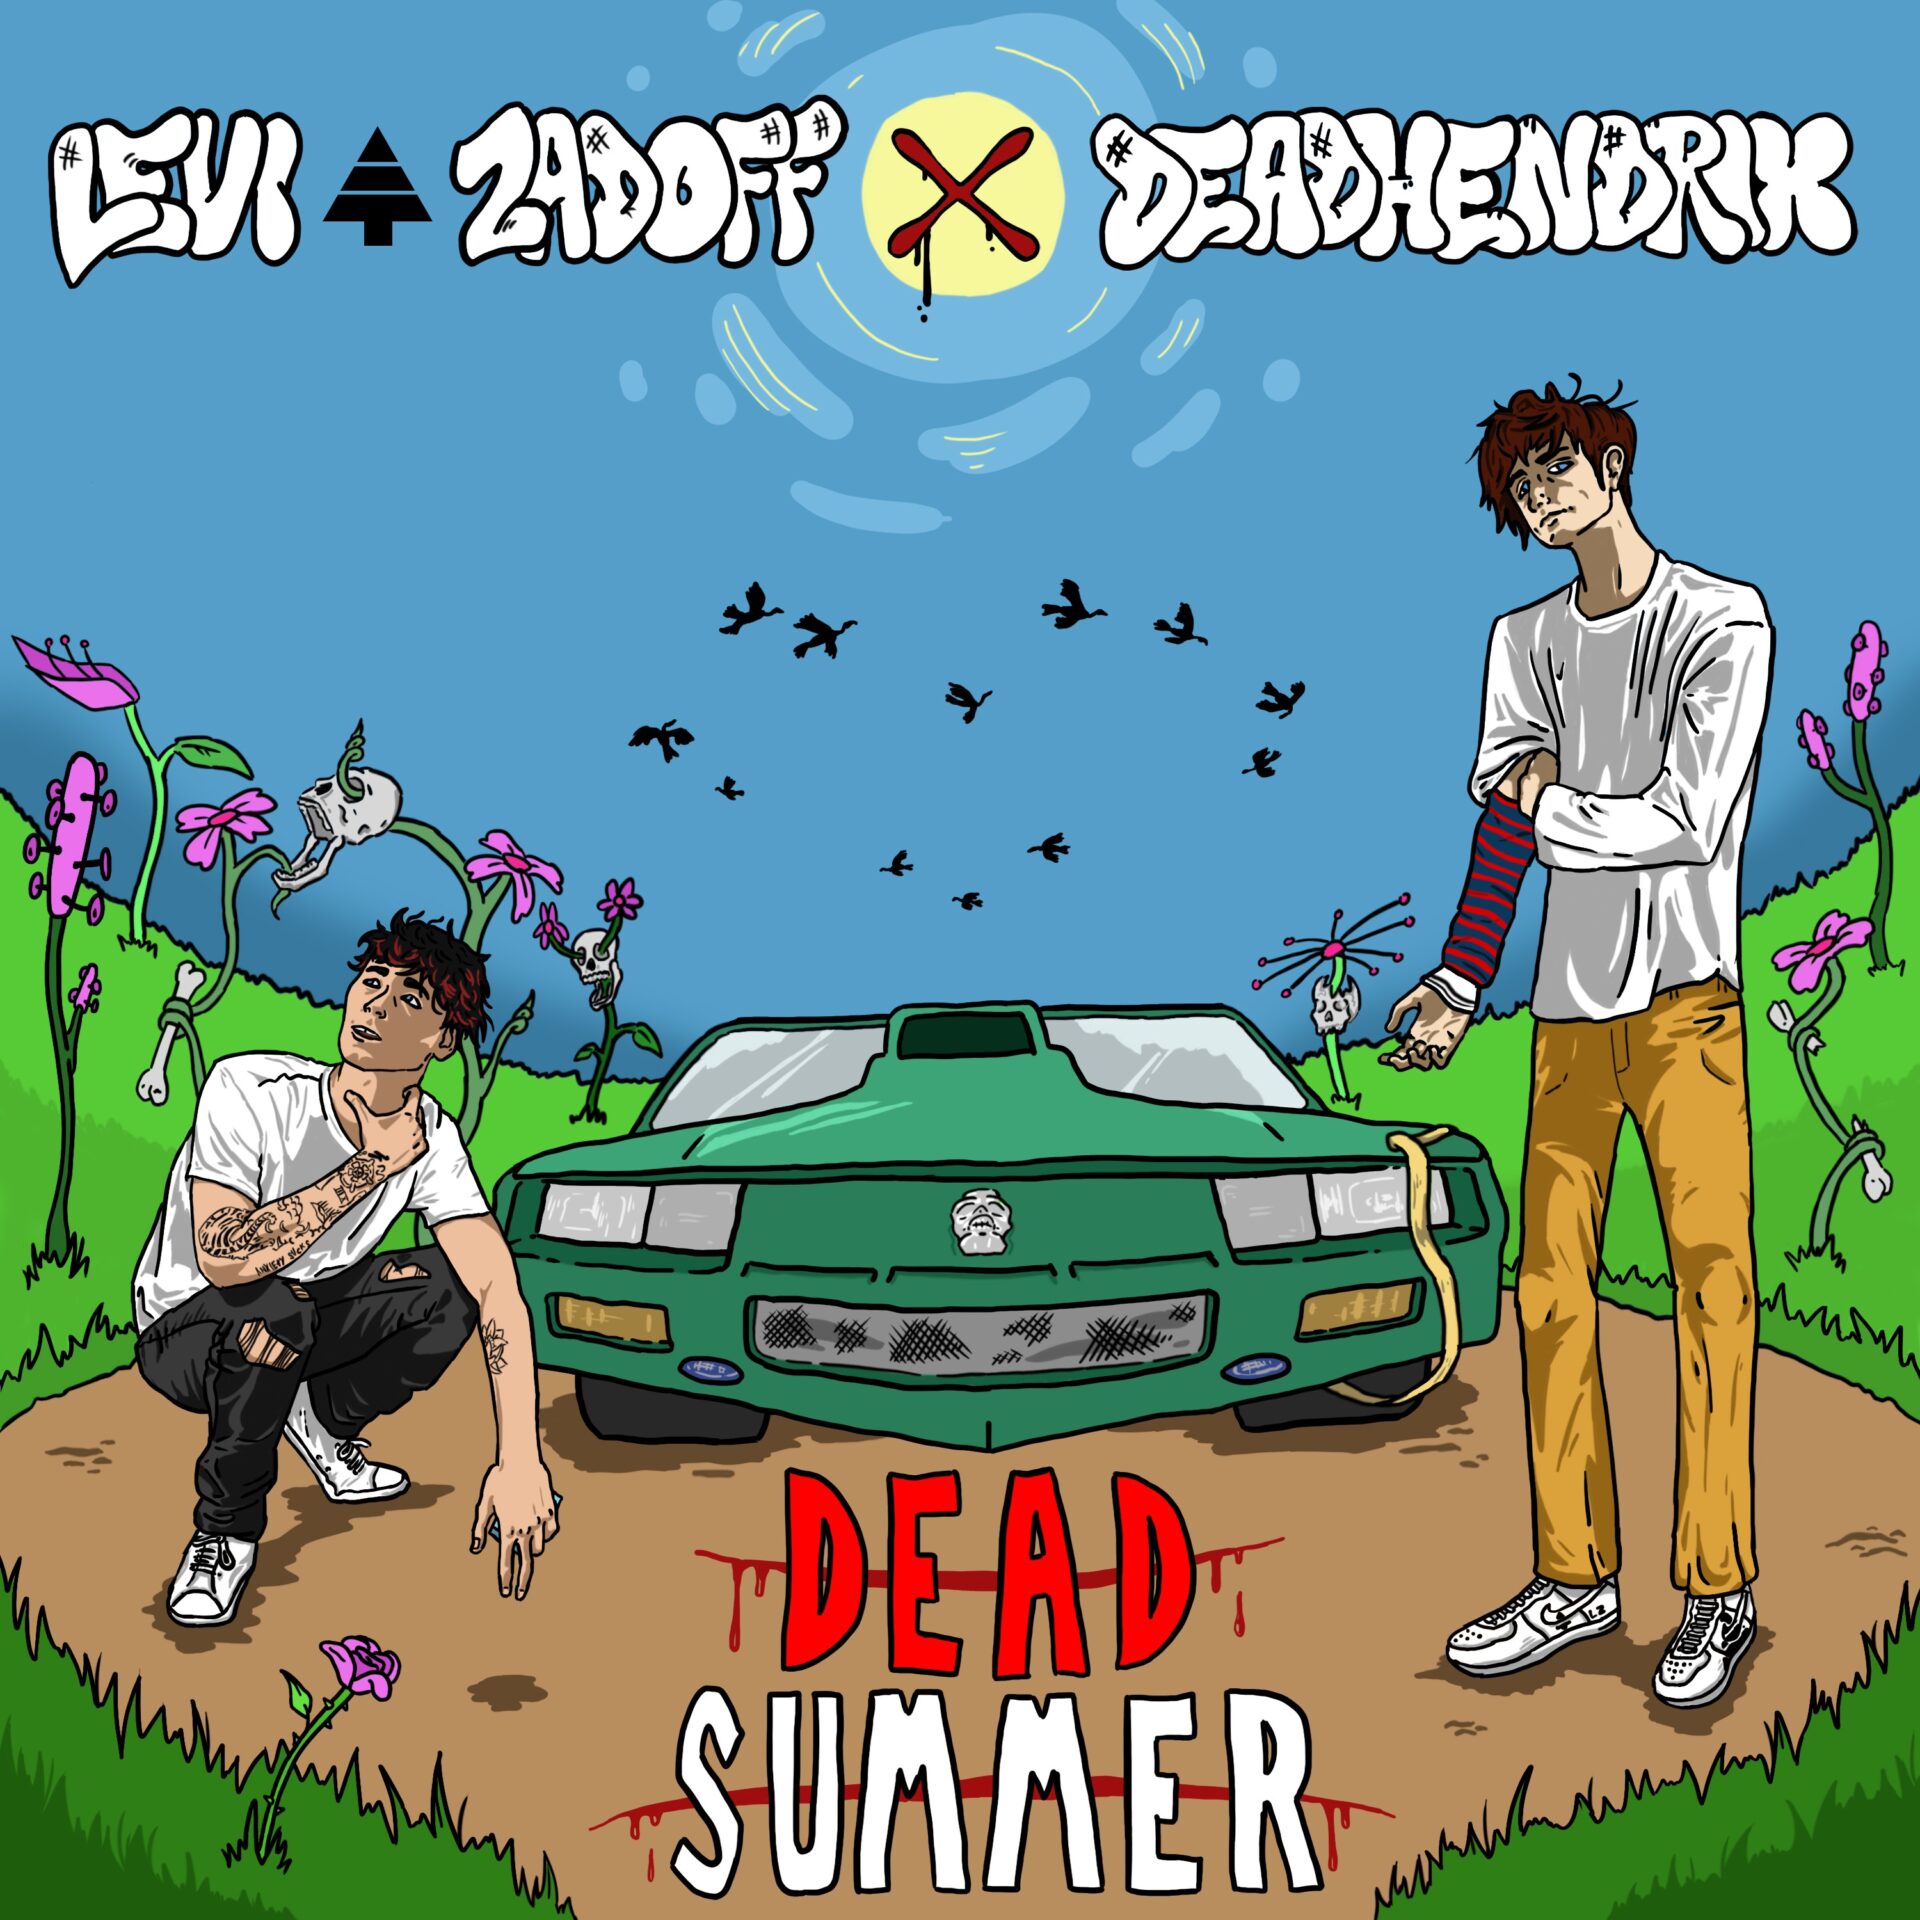 DEAD HENDRIX AND LEVI ZADOFF RELEASE THEIR DEBUT EP, "DEAD SUMMER."